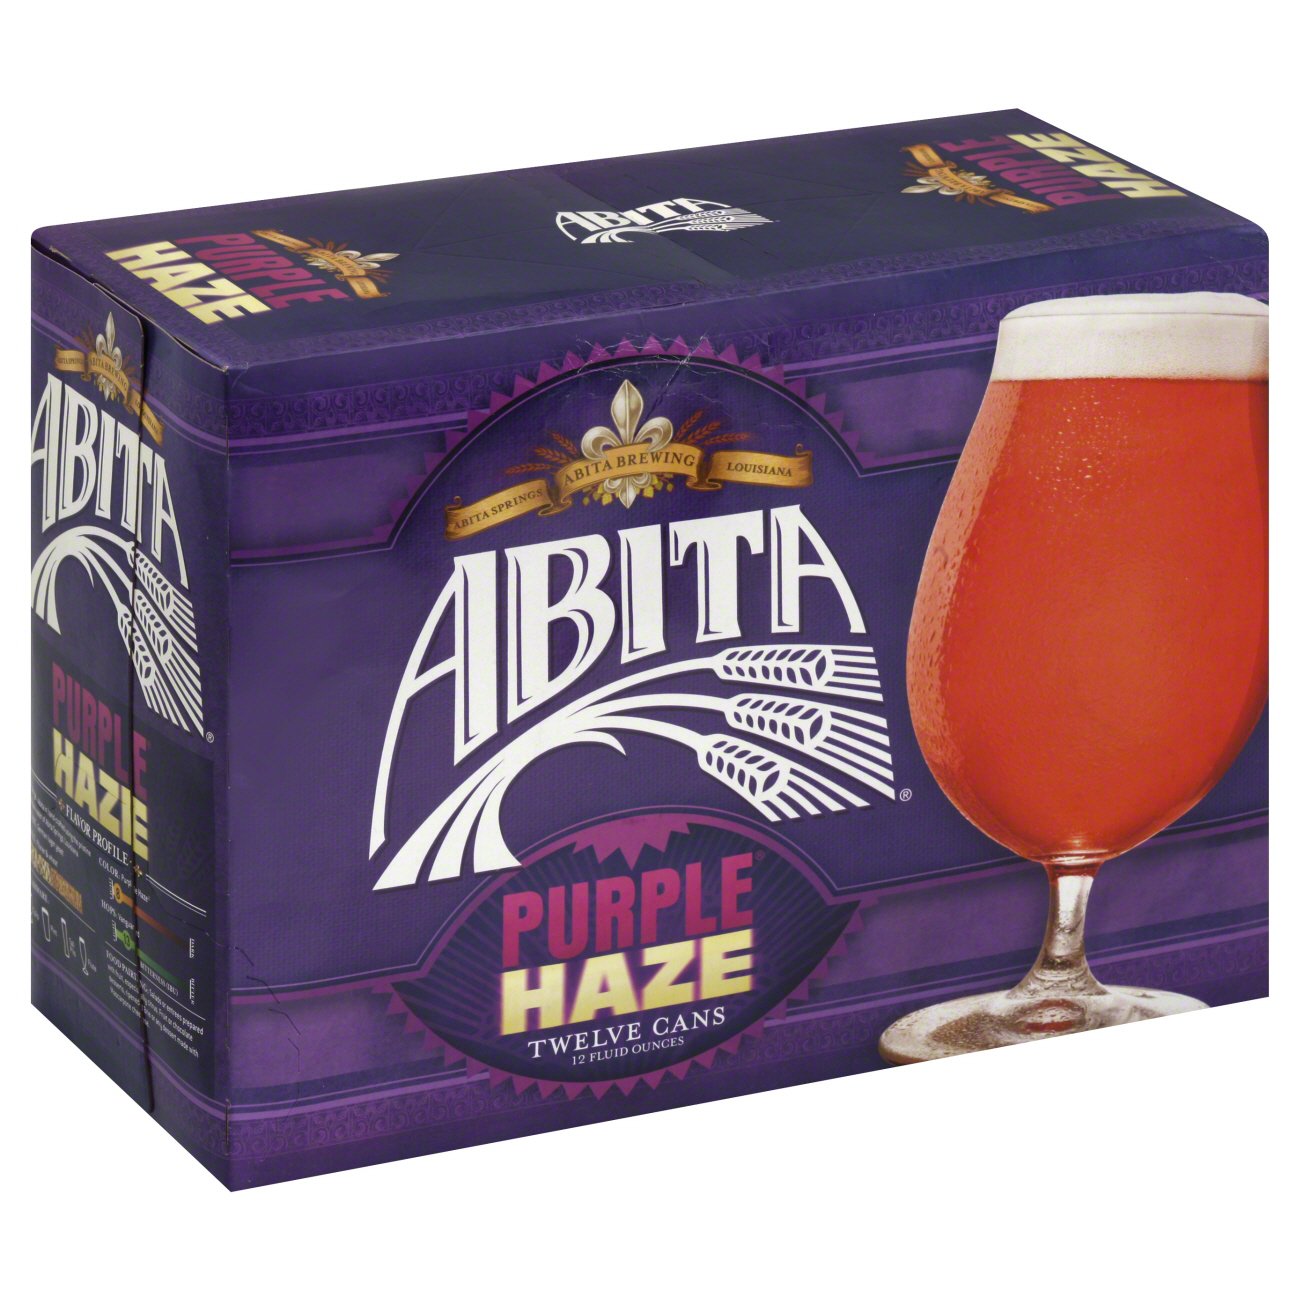 Abita Purple Haze Lager Beer Cans Shop Beer At H E B